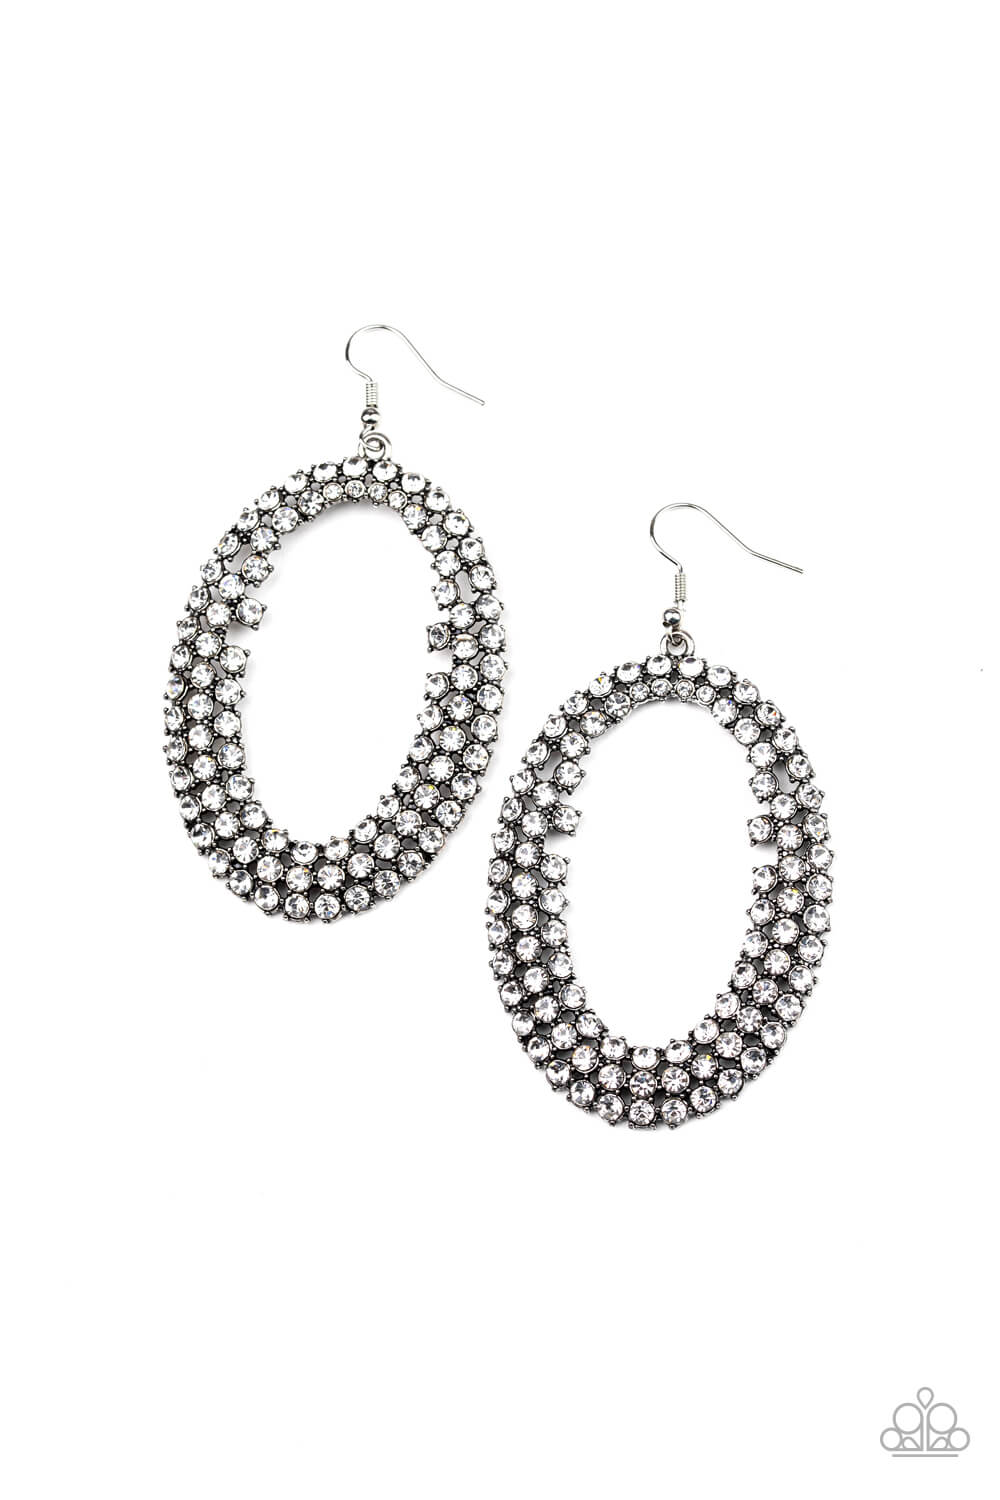 Radical Razzle - White Life of the Party Exclusive Earrings - Princess Glam Shop